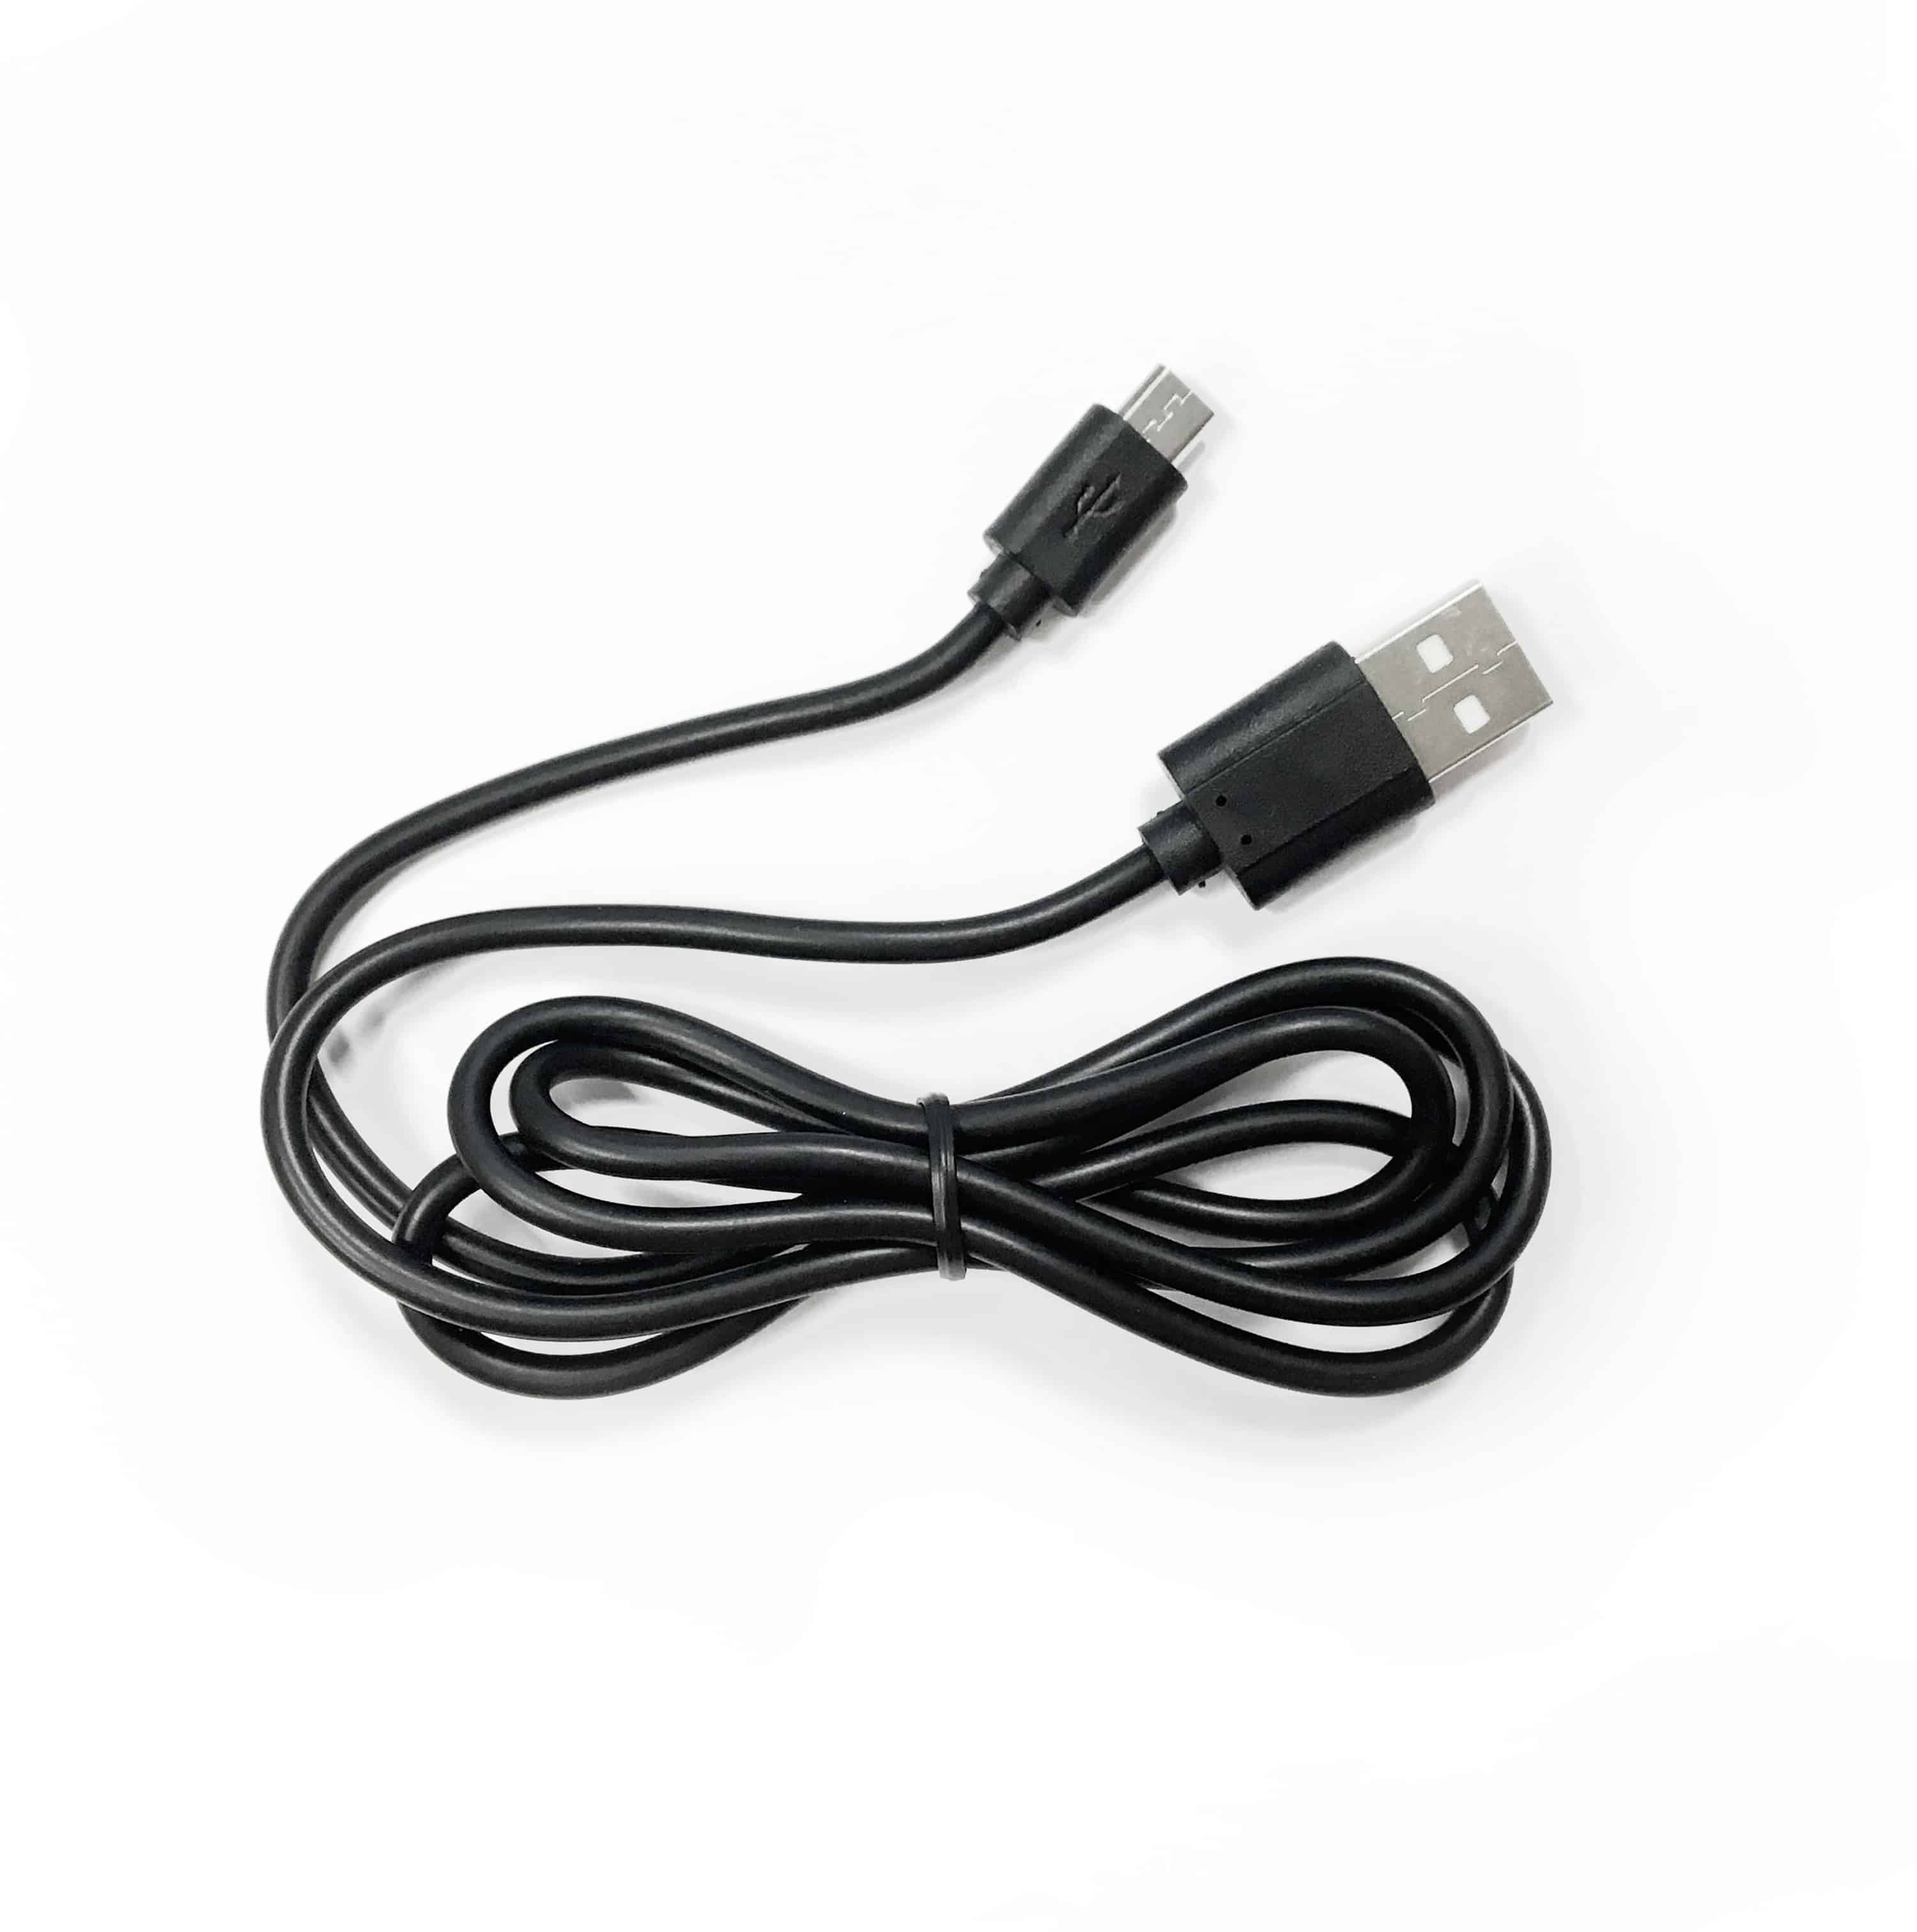 USB Charging Cord for Multiple Devices